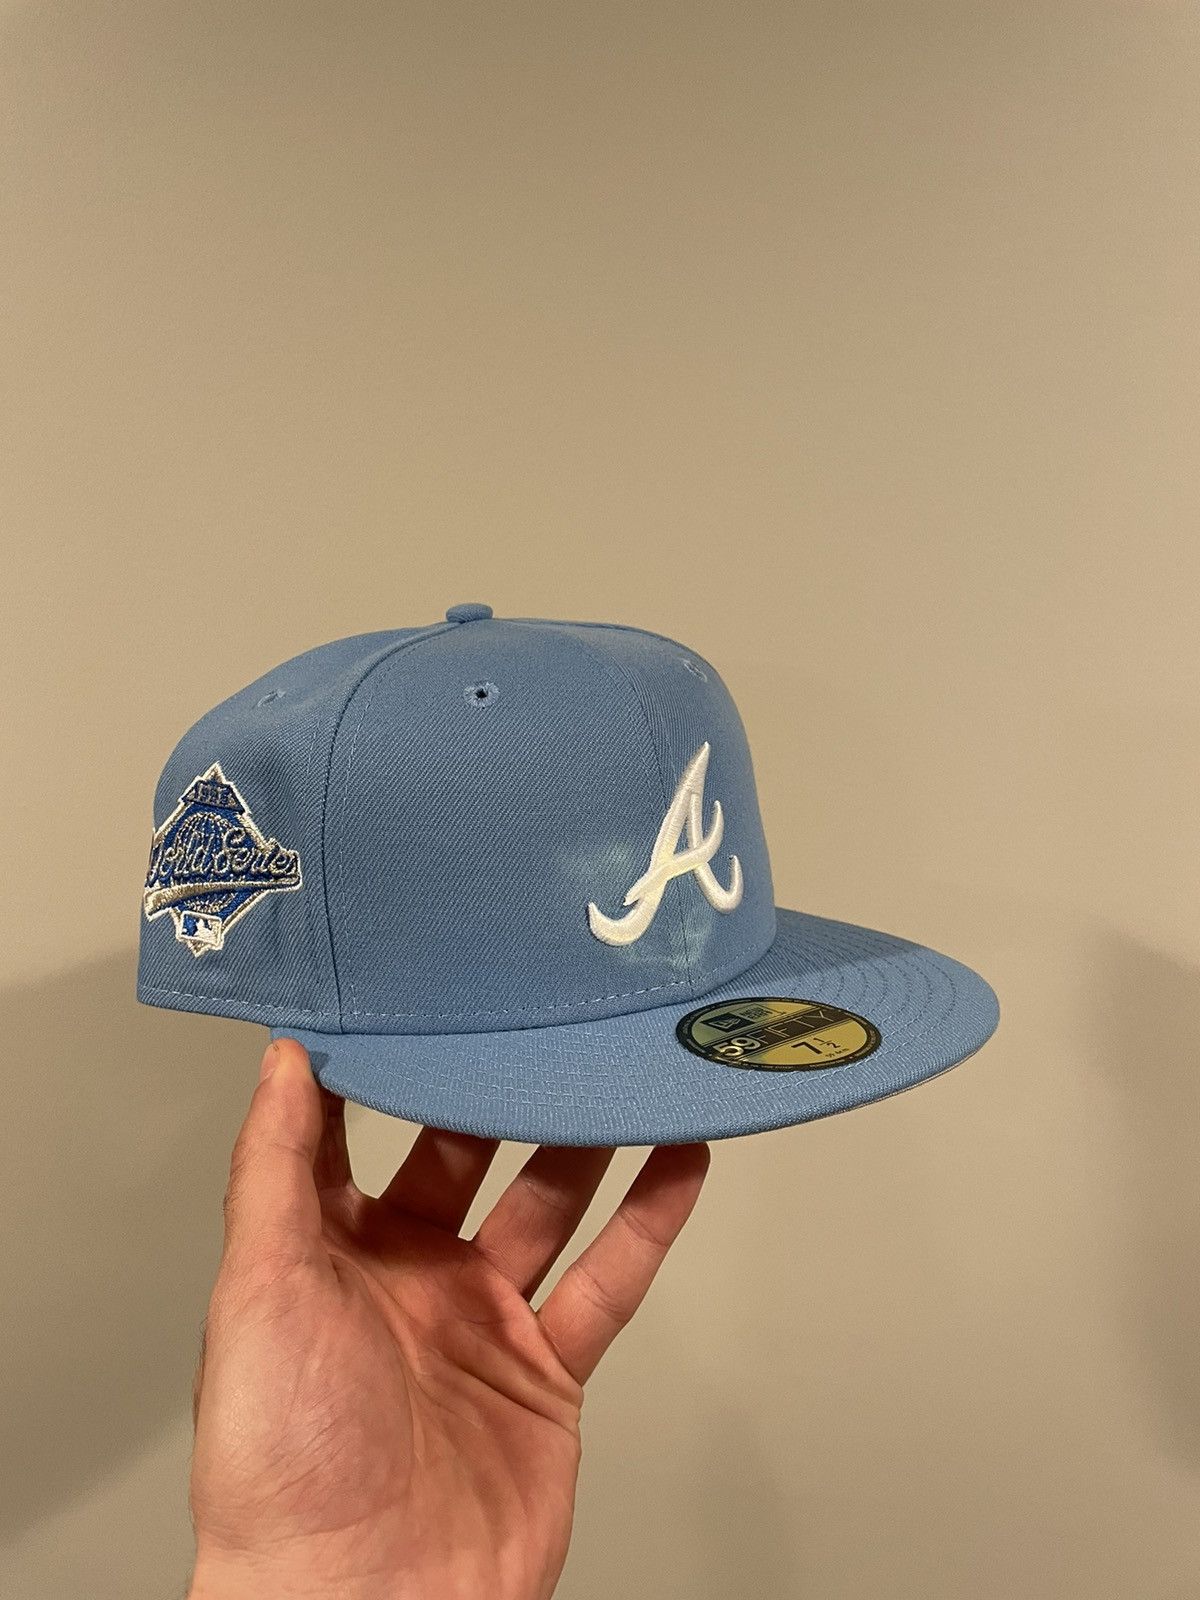 new-era-atlanta-braves-fitted-hat-size-7-1-2-not-hat-club-grailed